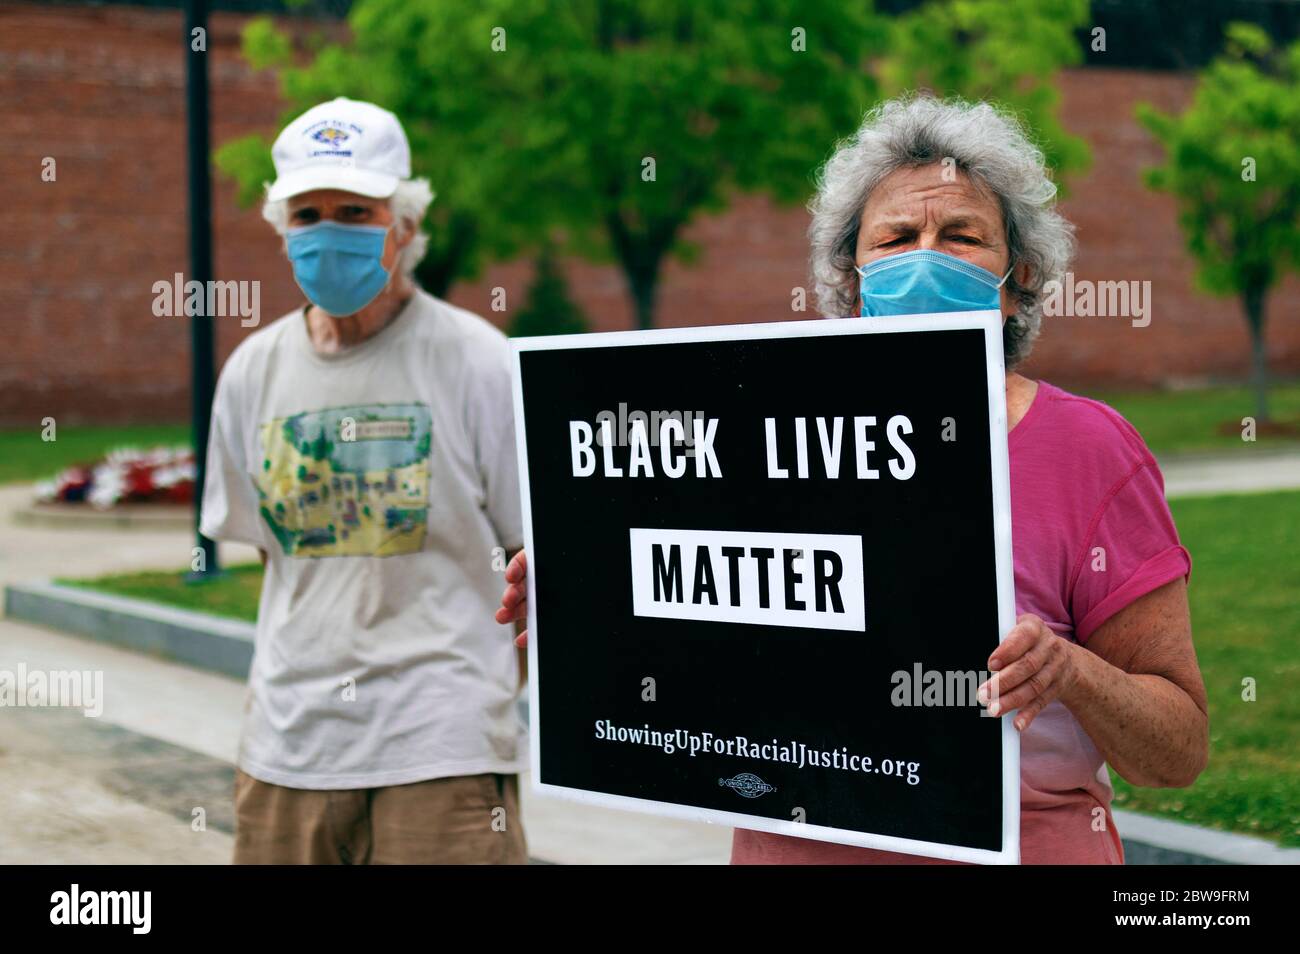 Protesters With Face Masks Hold A Black Lives Matter Sign Stock Photo